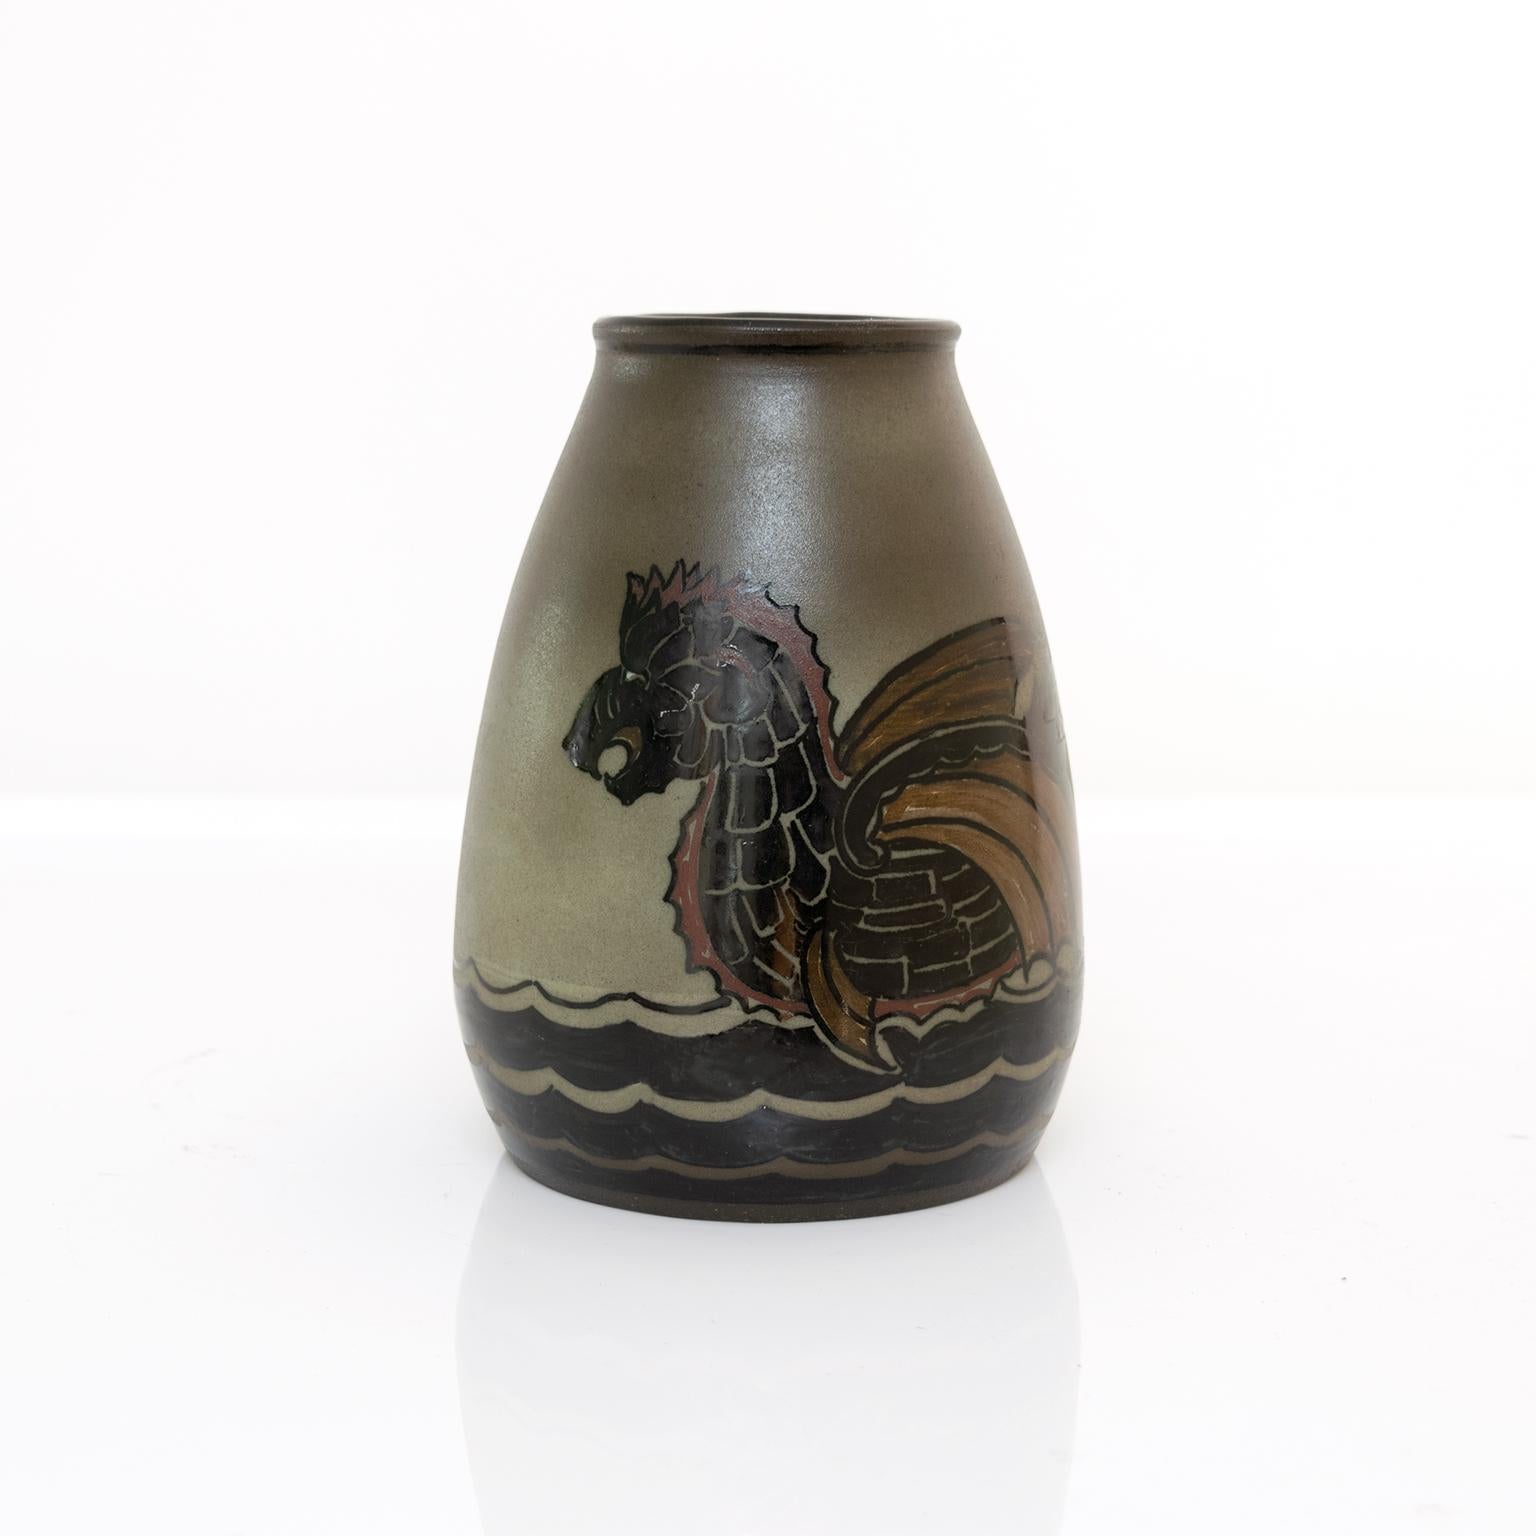 Unique Scandinavian Modern hand thrown and painted ceramic vase by Josef Ekberg for Gustavsberg, Sweden. The vase depicts a boat carved as a serpents body at sea. Circa 1930.

Measures: Height: 7.75